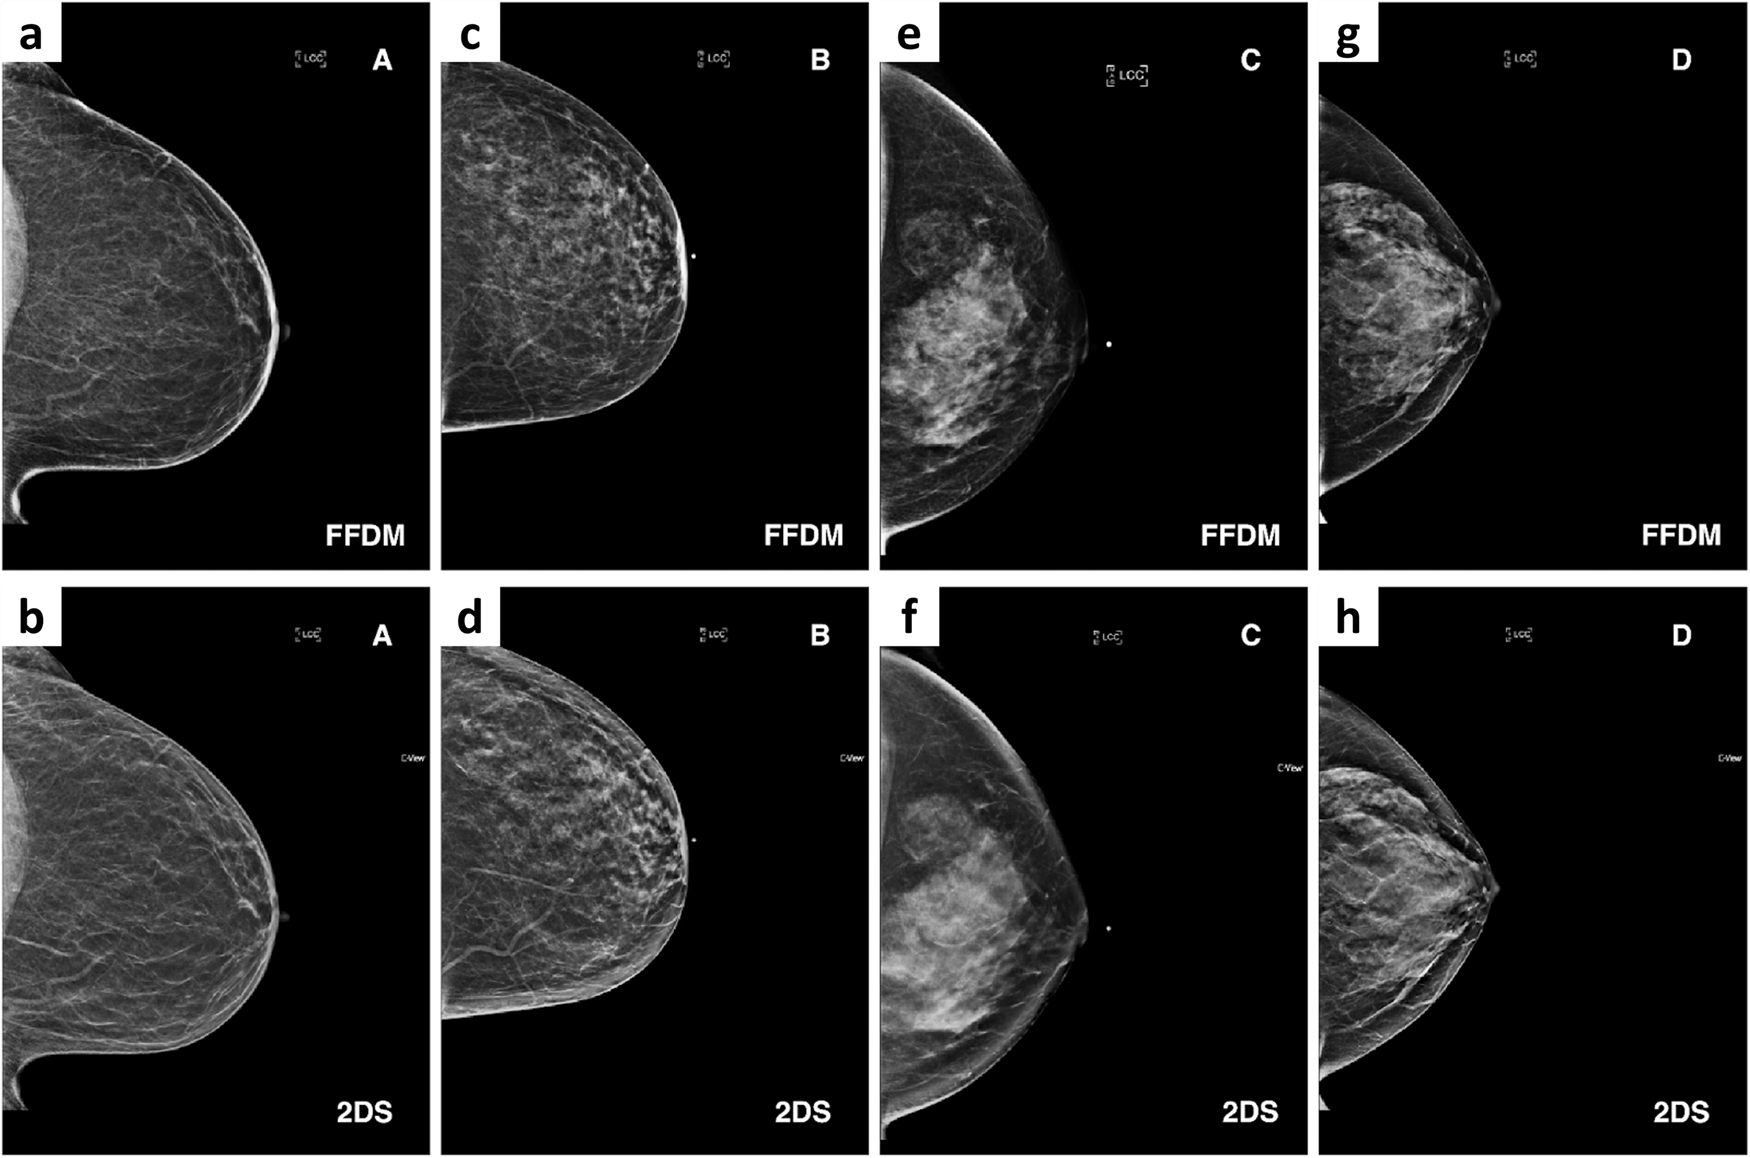 A-D Four representative cases of different breast size and parenchymal